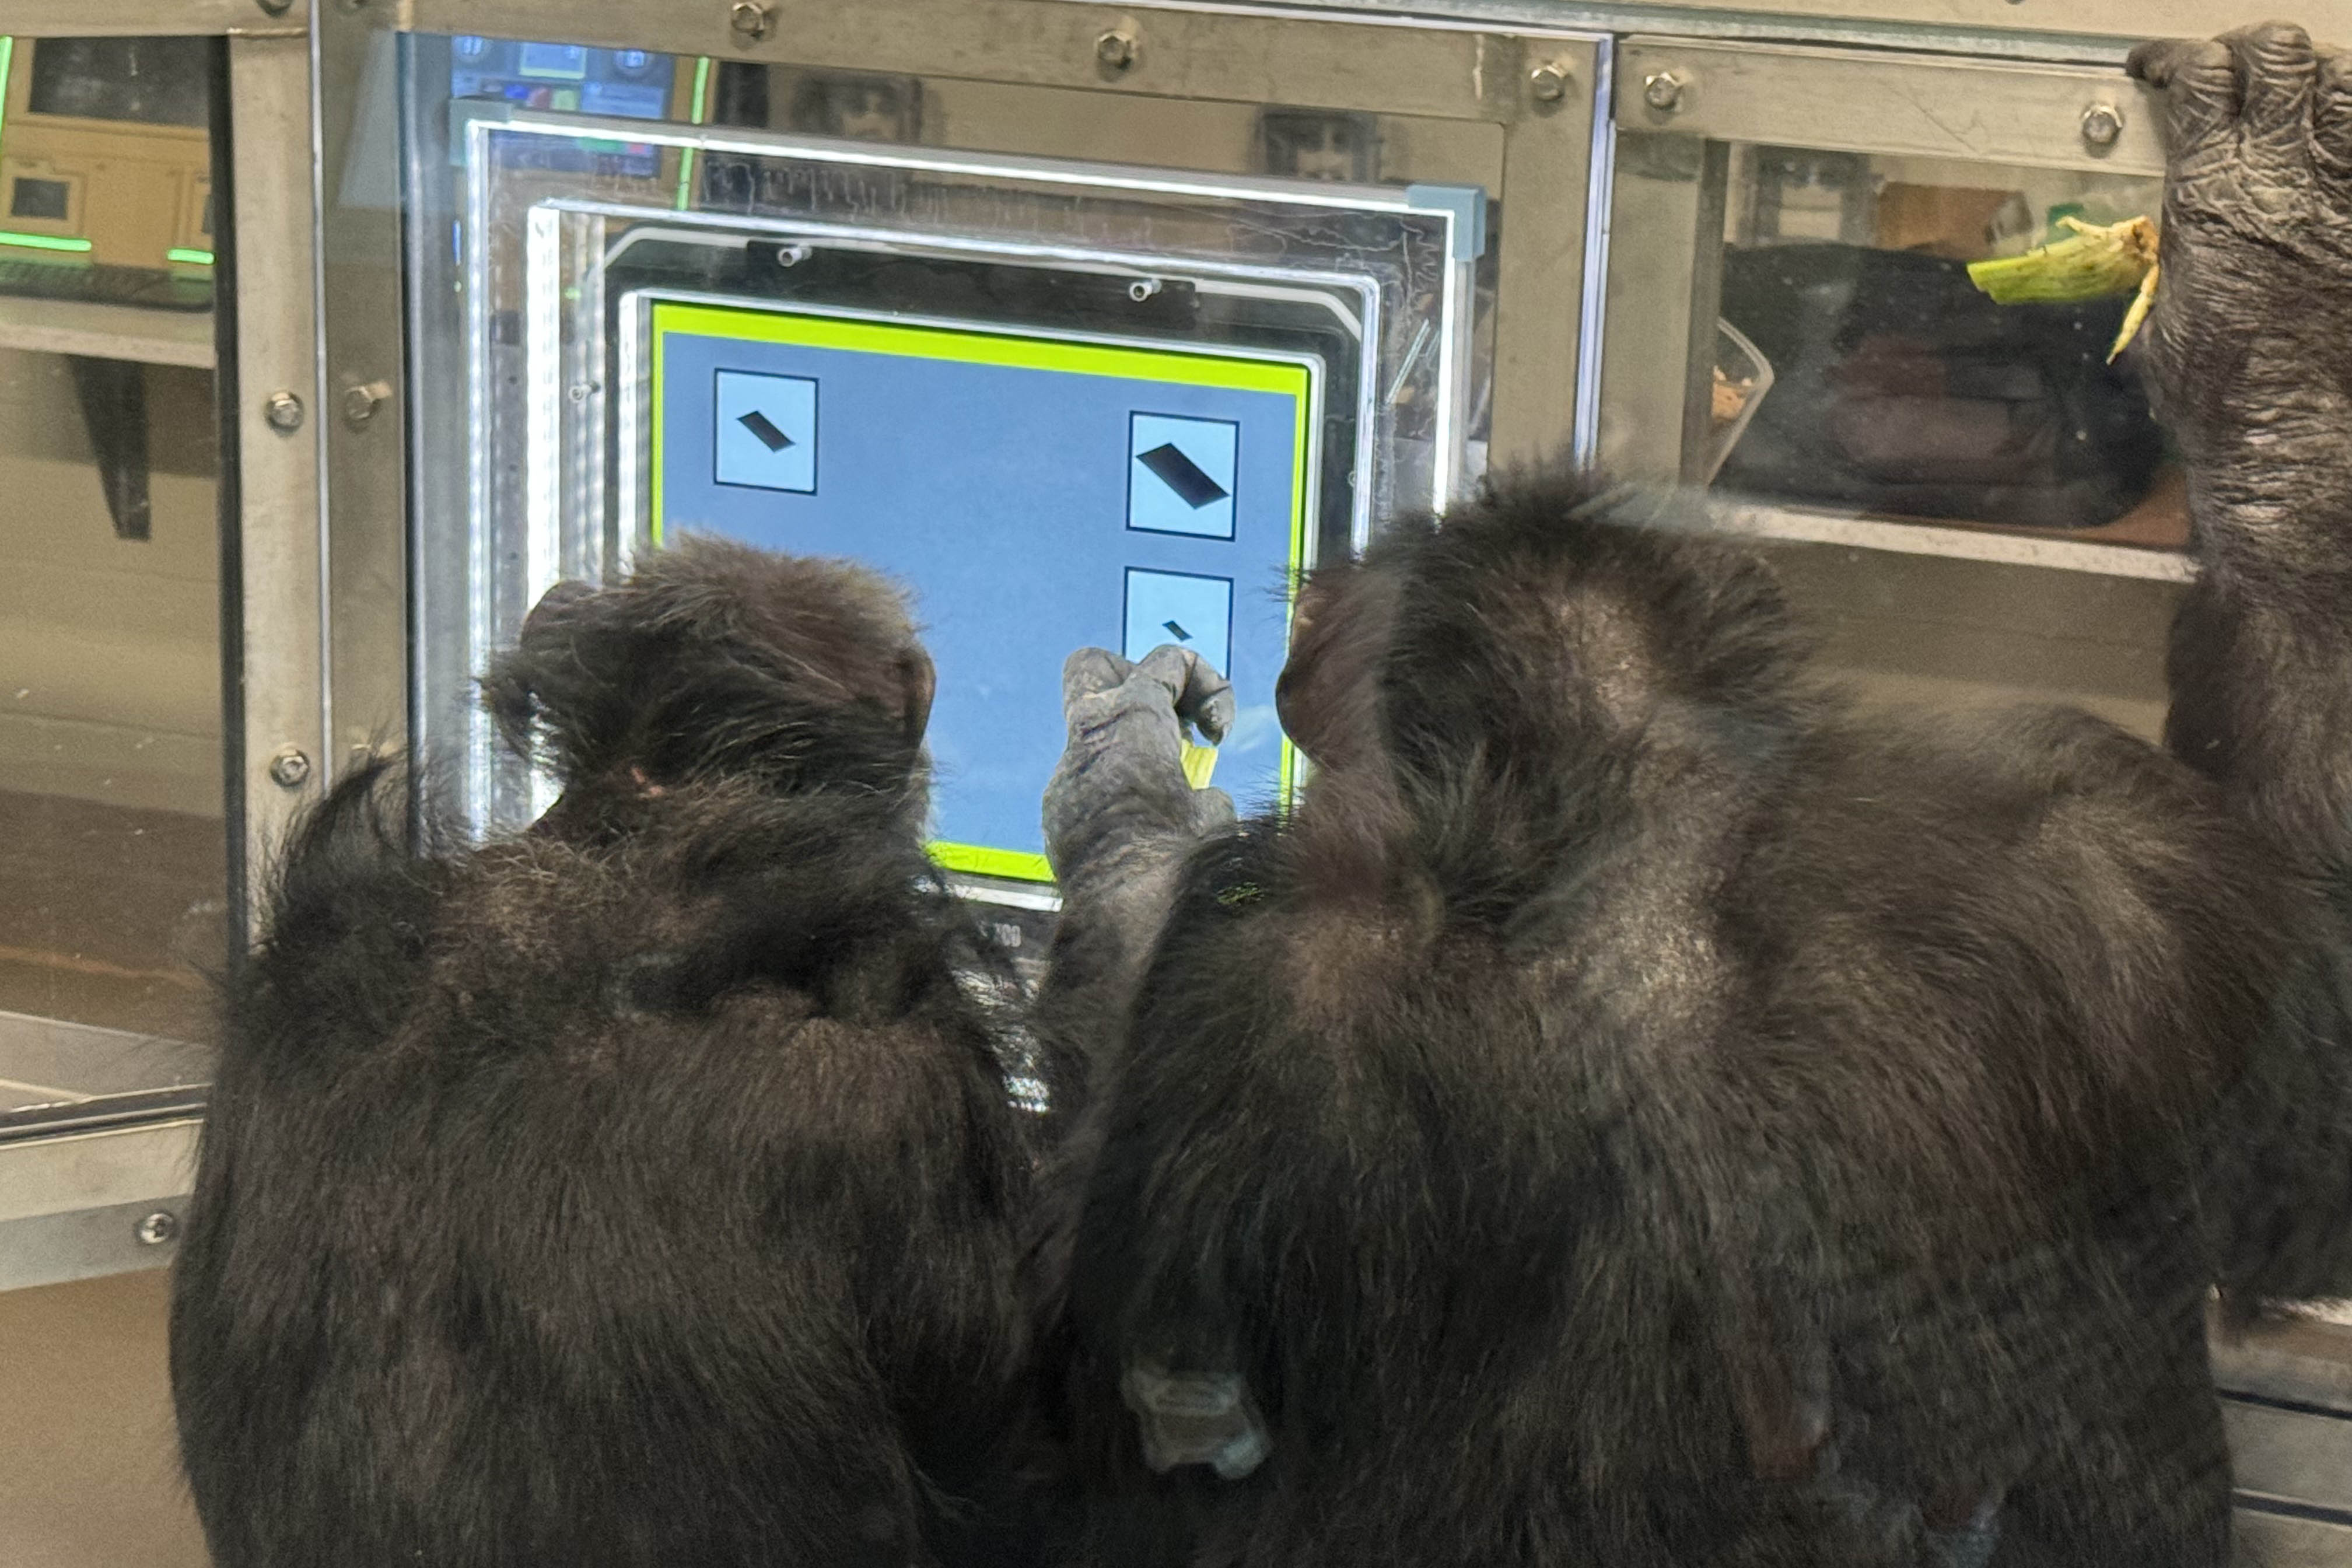 Two chimpanzees work a touch screen in the Chimpanzee Cognitive Center at the Indianapolis Zoo.